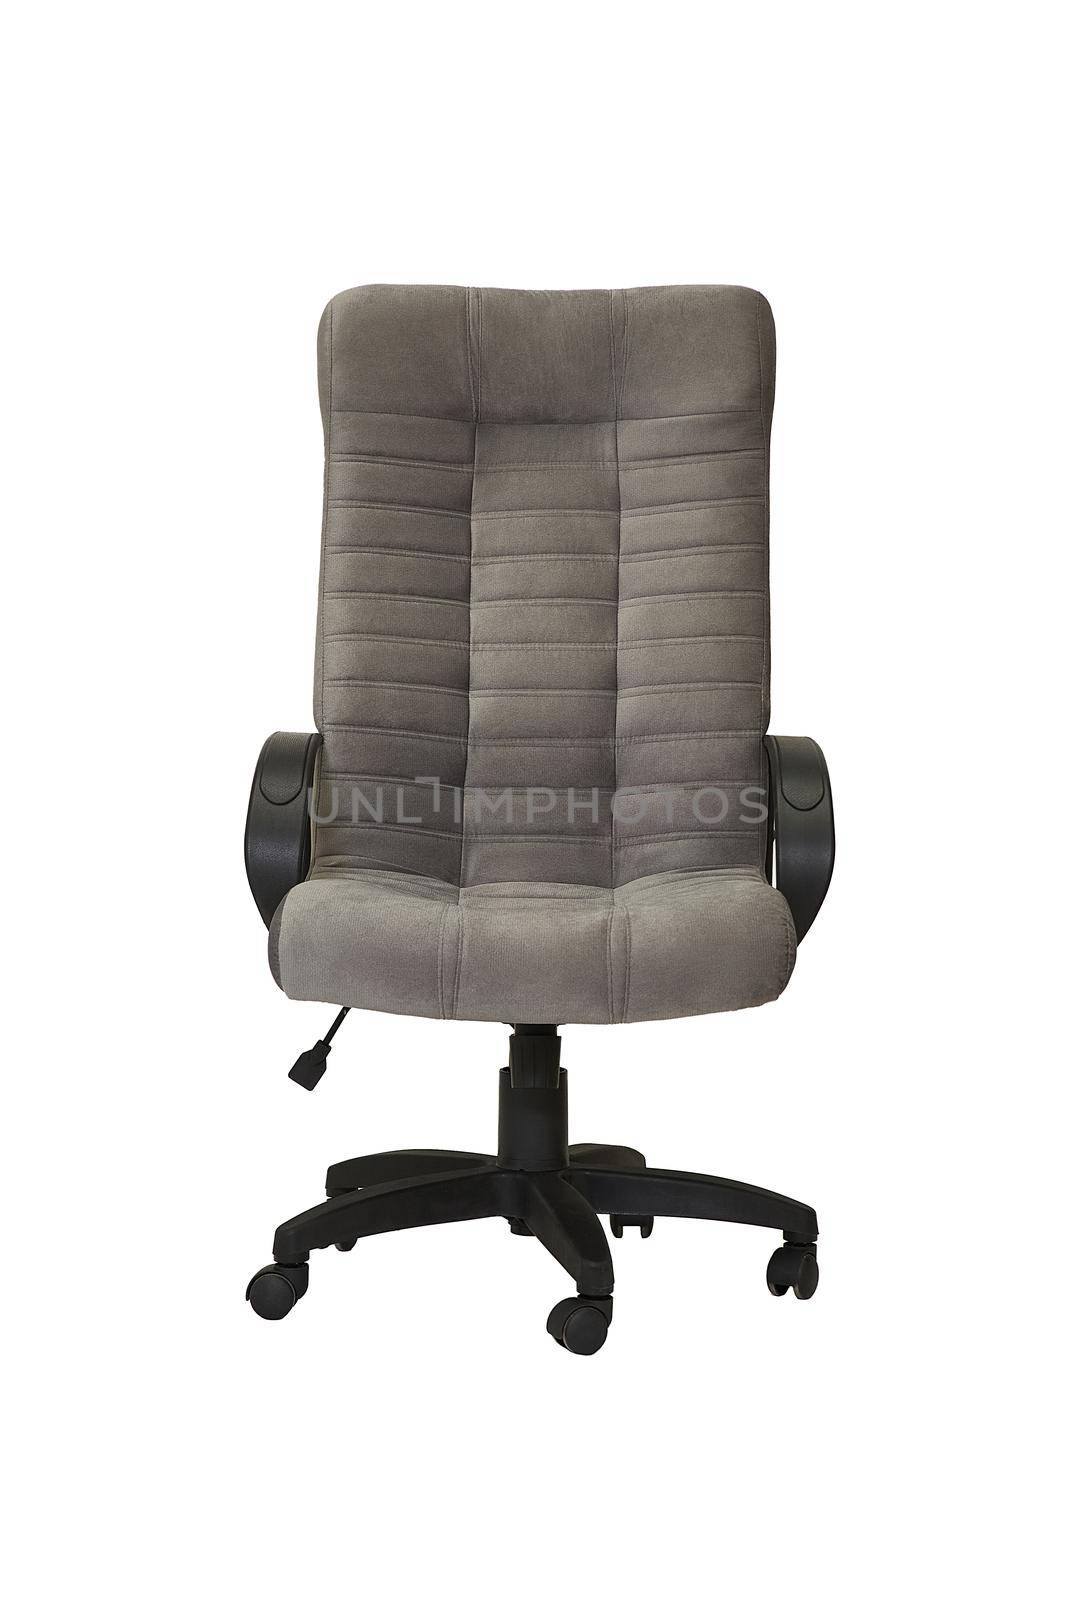 grey fabric office armchair on wheels isolated on white background. front view